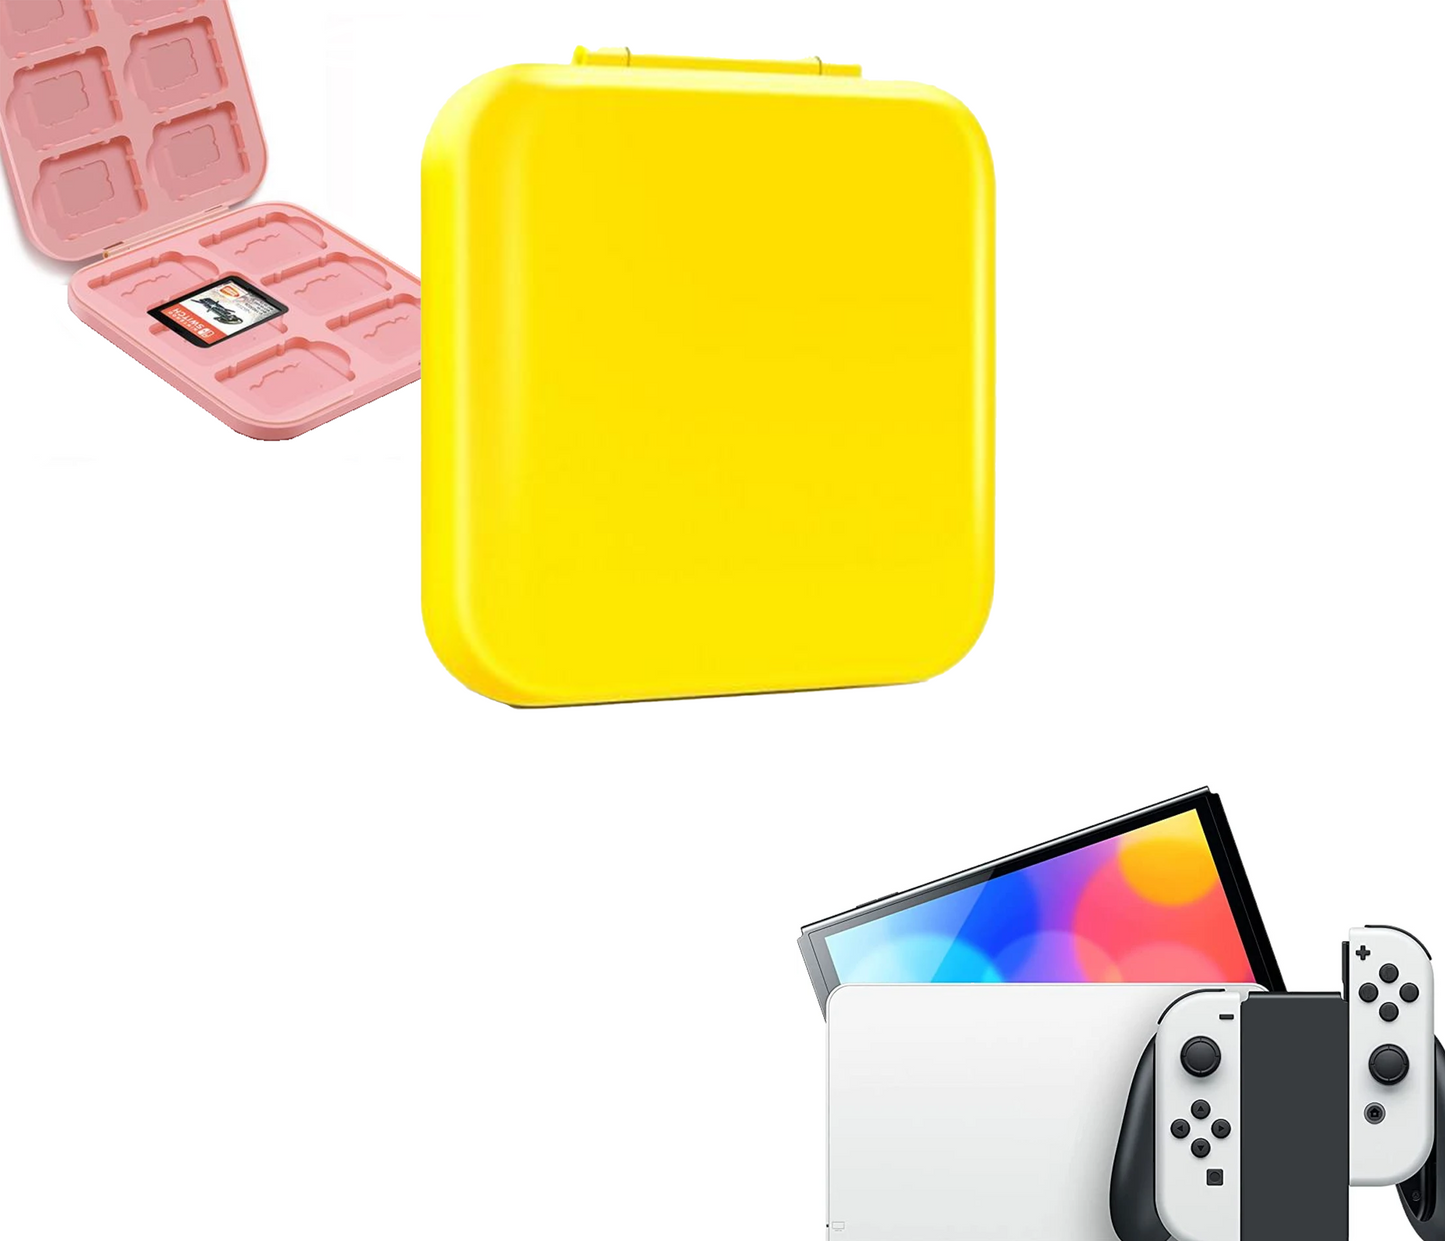 Cassette holder | Game holder | Storage box | Cassette box | Yellow | Accessories suitable for Nintendo Switch